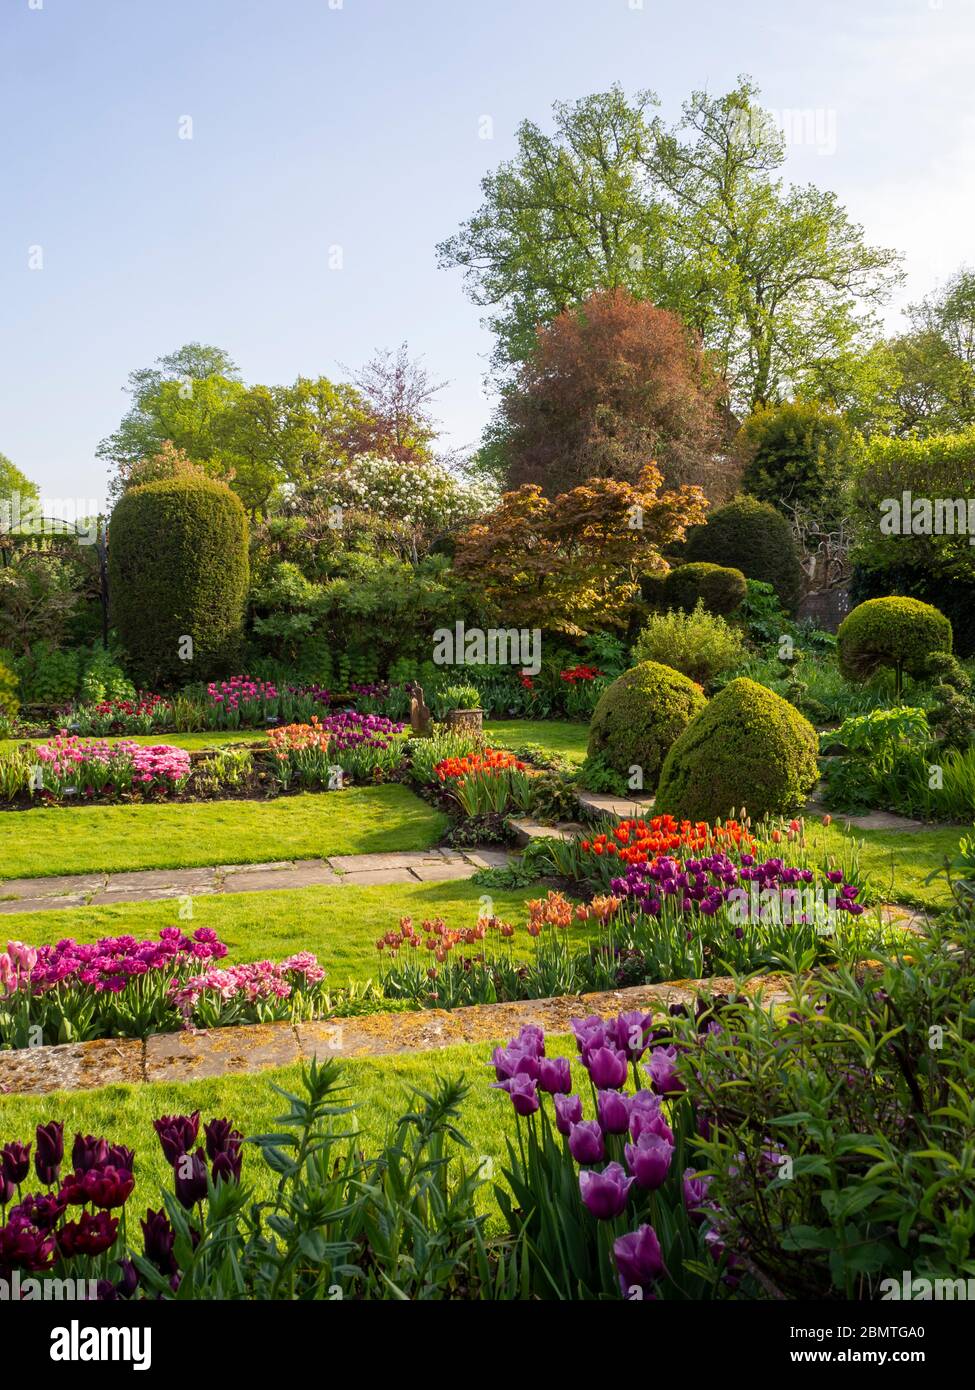 Path up the steps through clipped box bushes in the Sunken garden at Chenies Manor at tulip time. Lawn and paved paths through rows of spring bulbs. Stock Photo